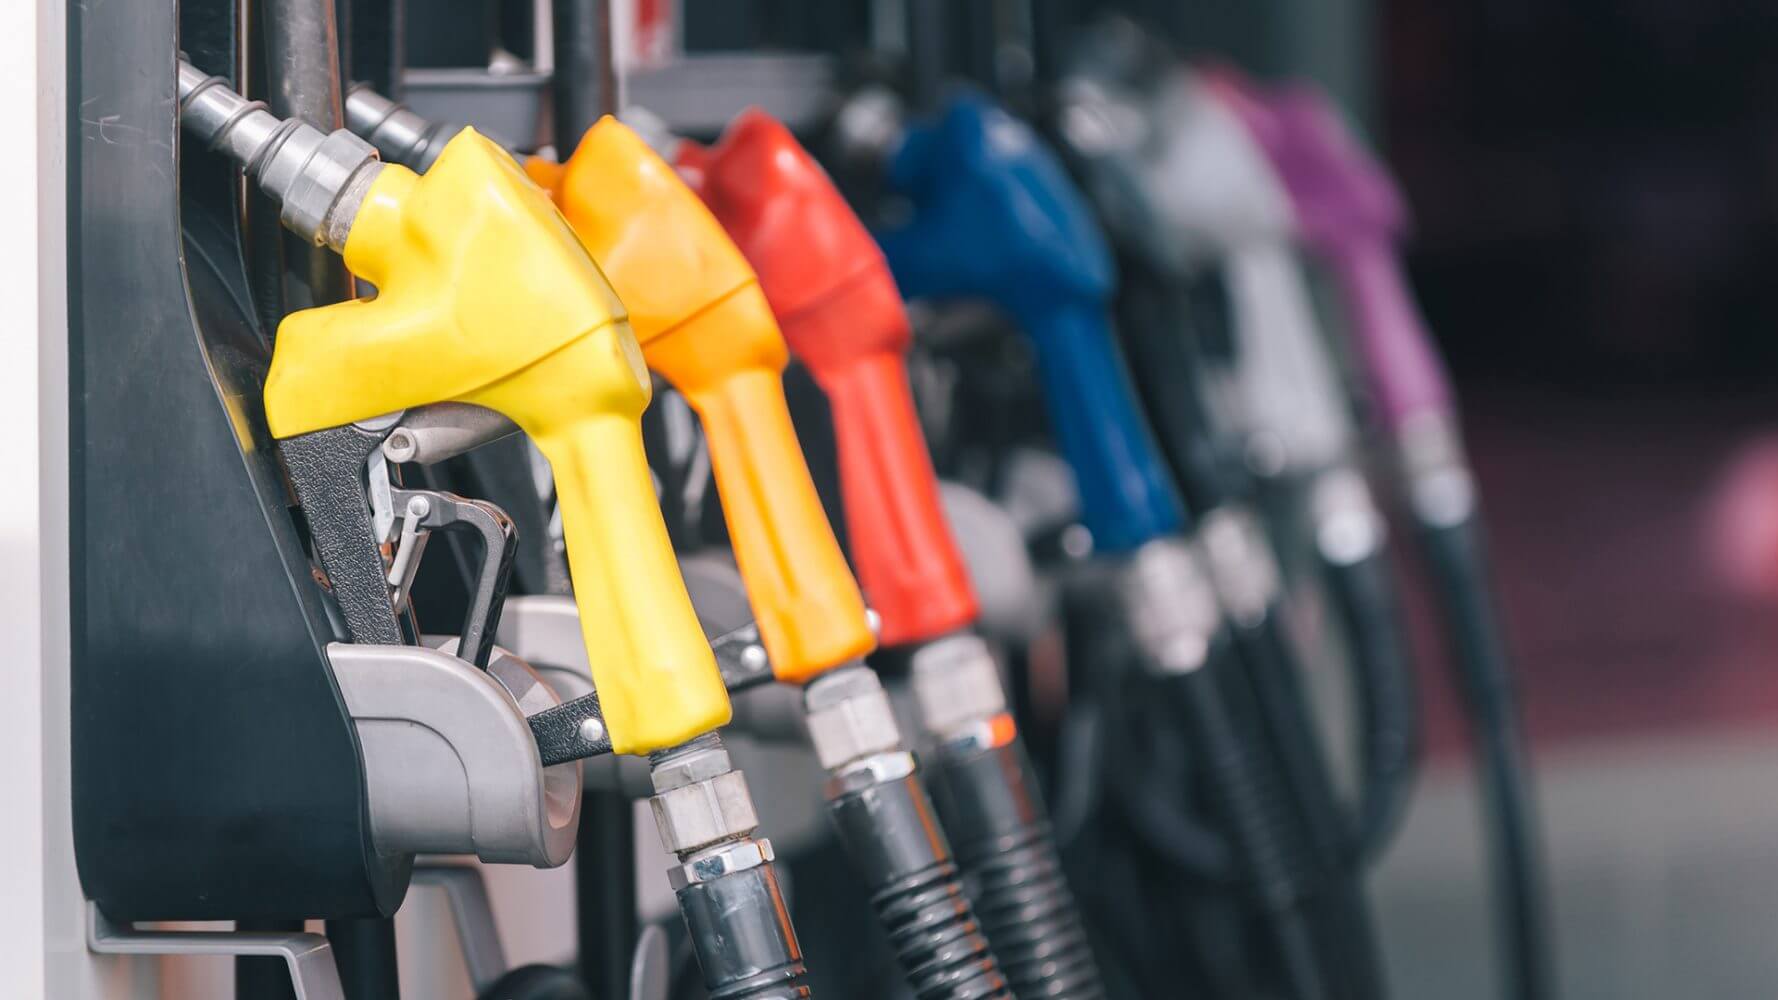 Considering high inflation, what can be done to mitigate these high costs? Gas fuel dispensers lie in a row, each in a different bright color.